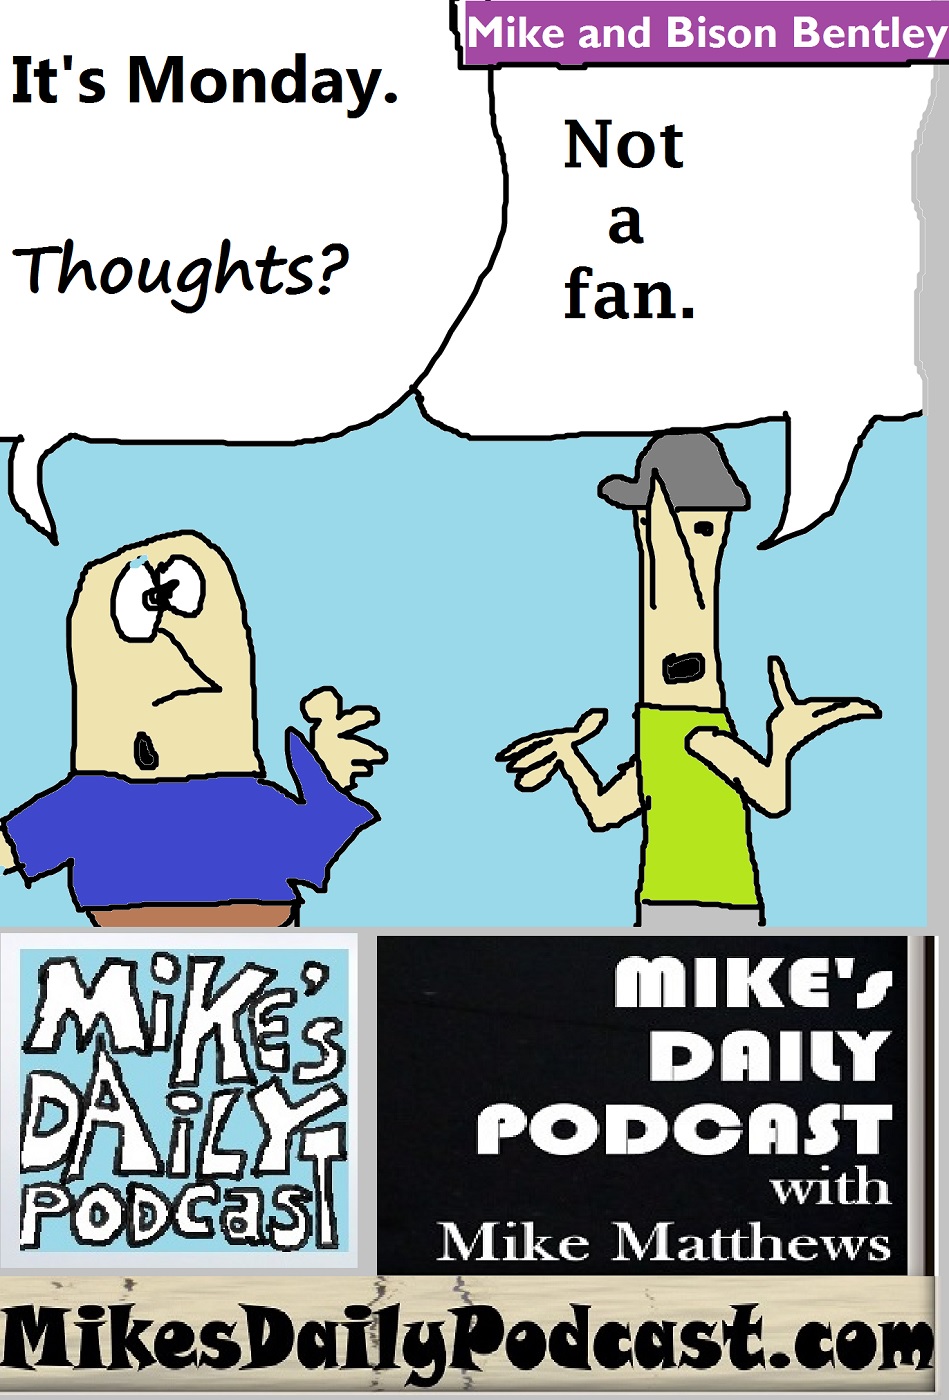 MIKEs DAILY PODCAST 1133 dang Mondays